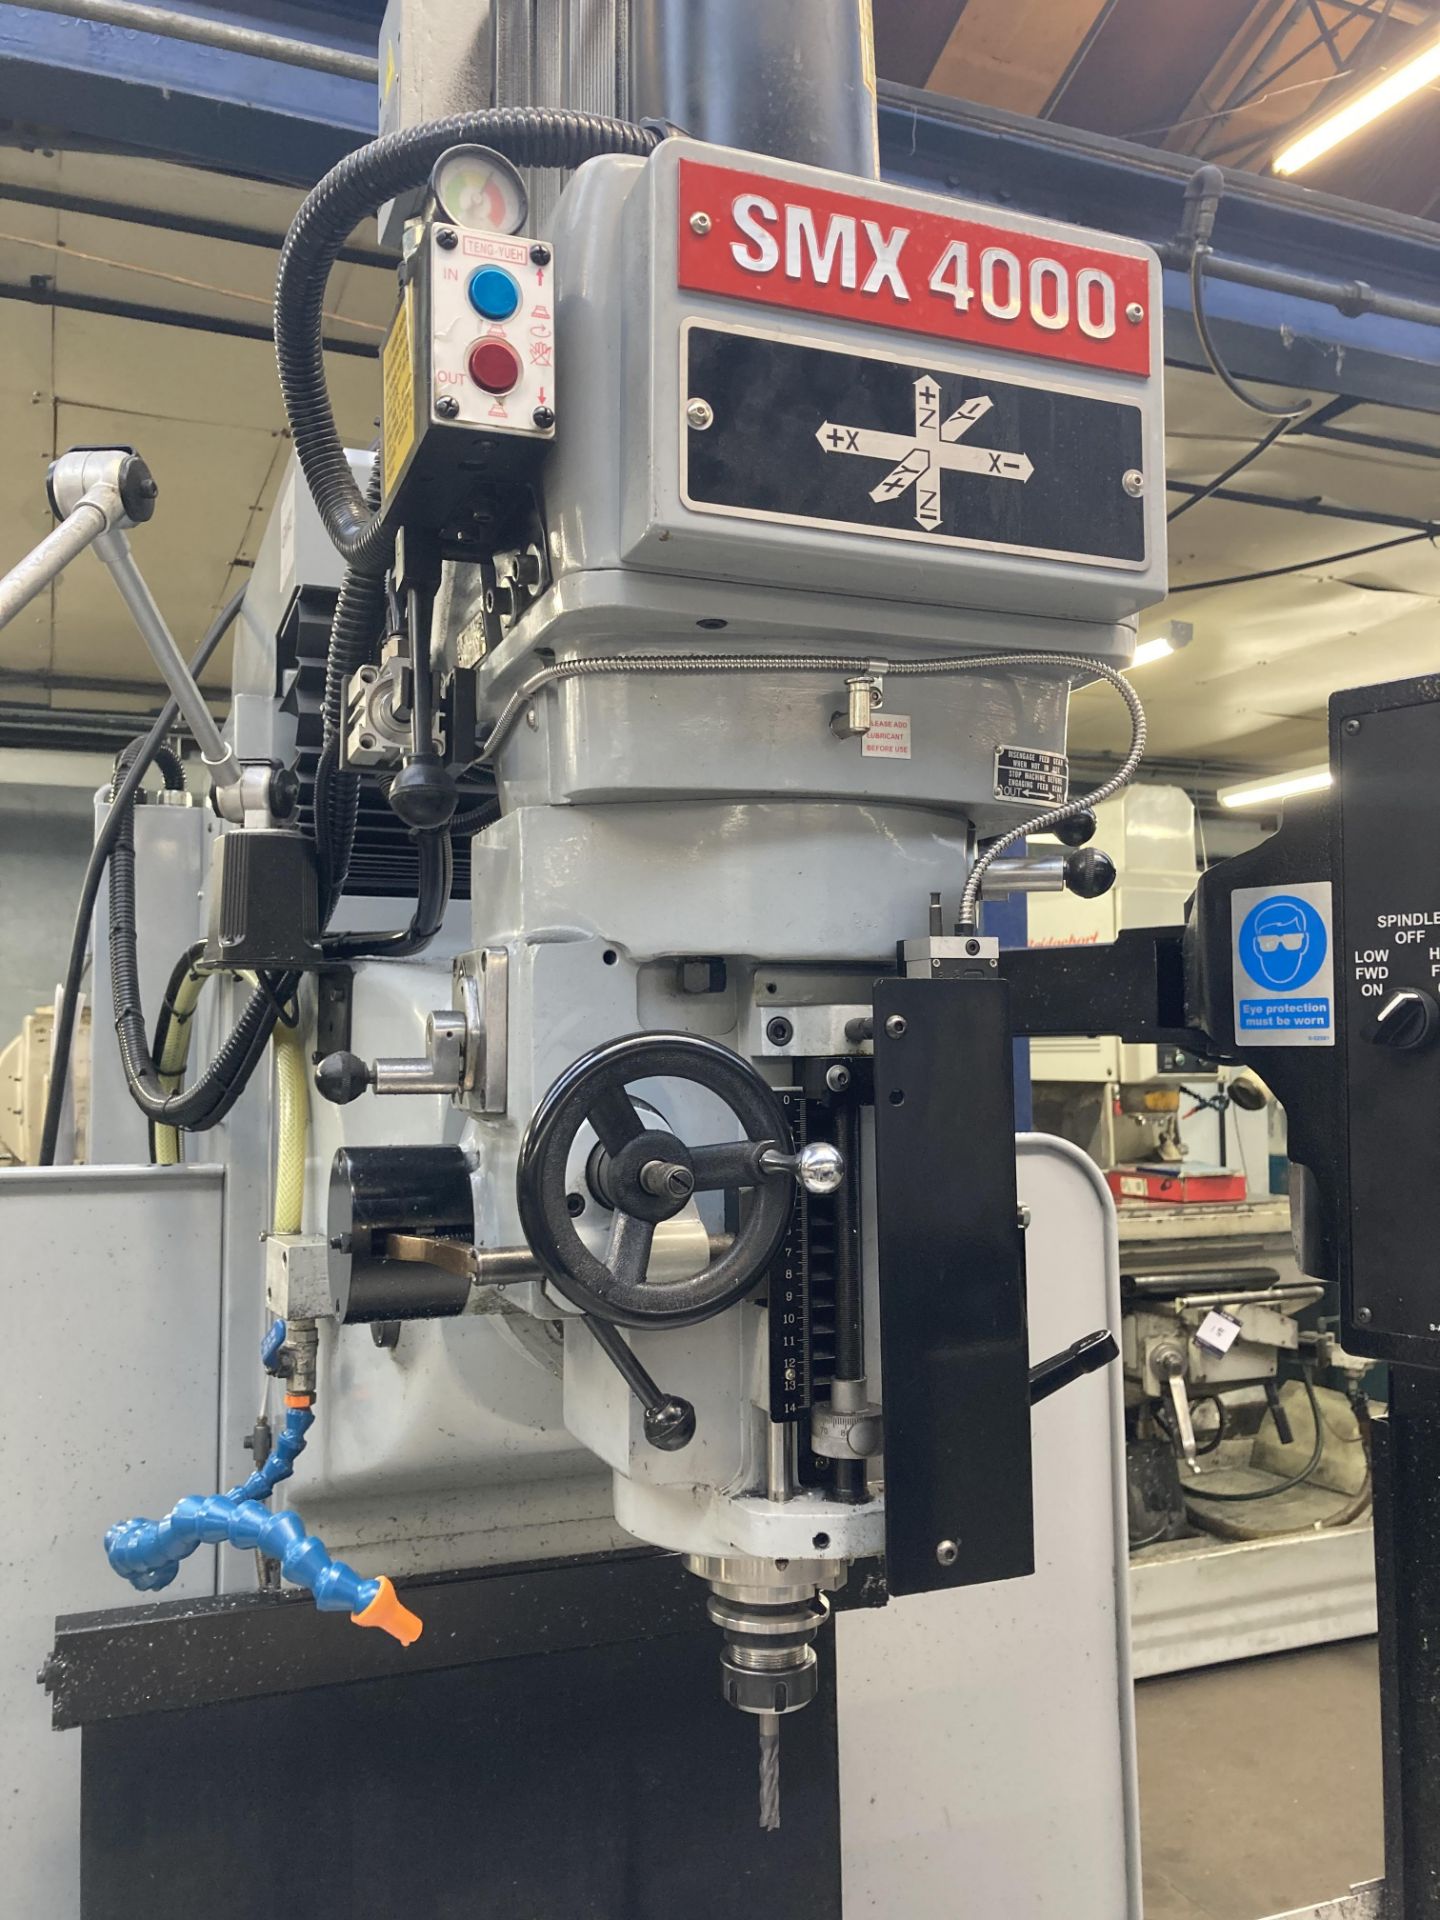 XYZ SMX 4000 CNC 3 axis vertical bed milling machine, Serial No. 13119 (2019), table size 1474mm x - Image 2 of 7